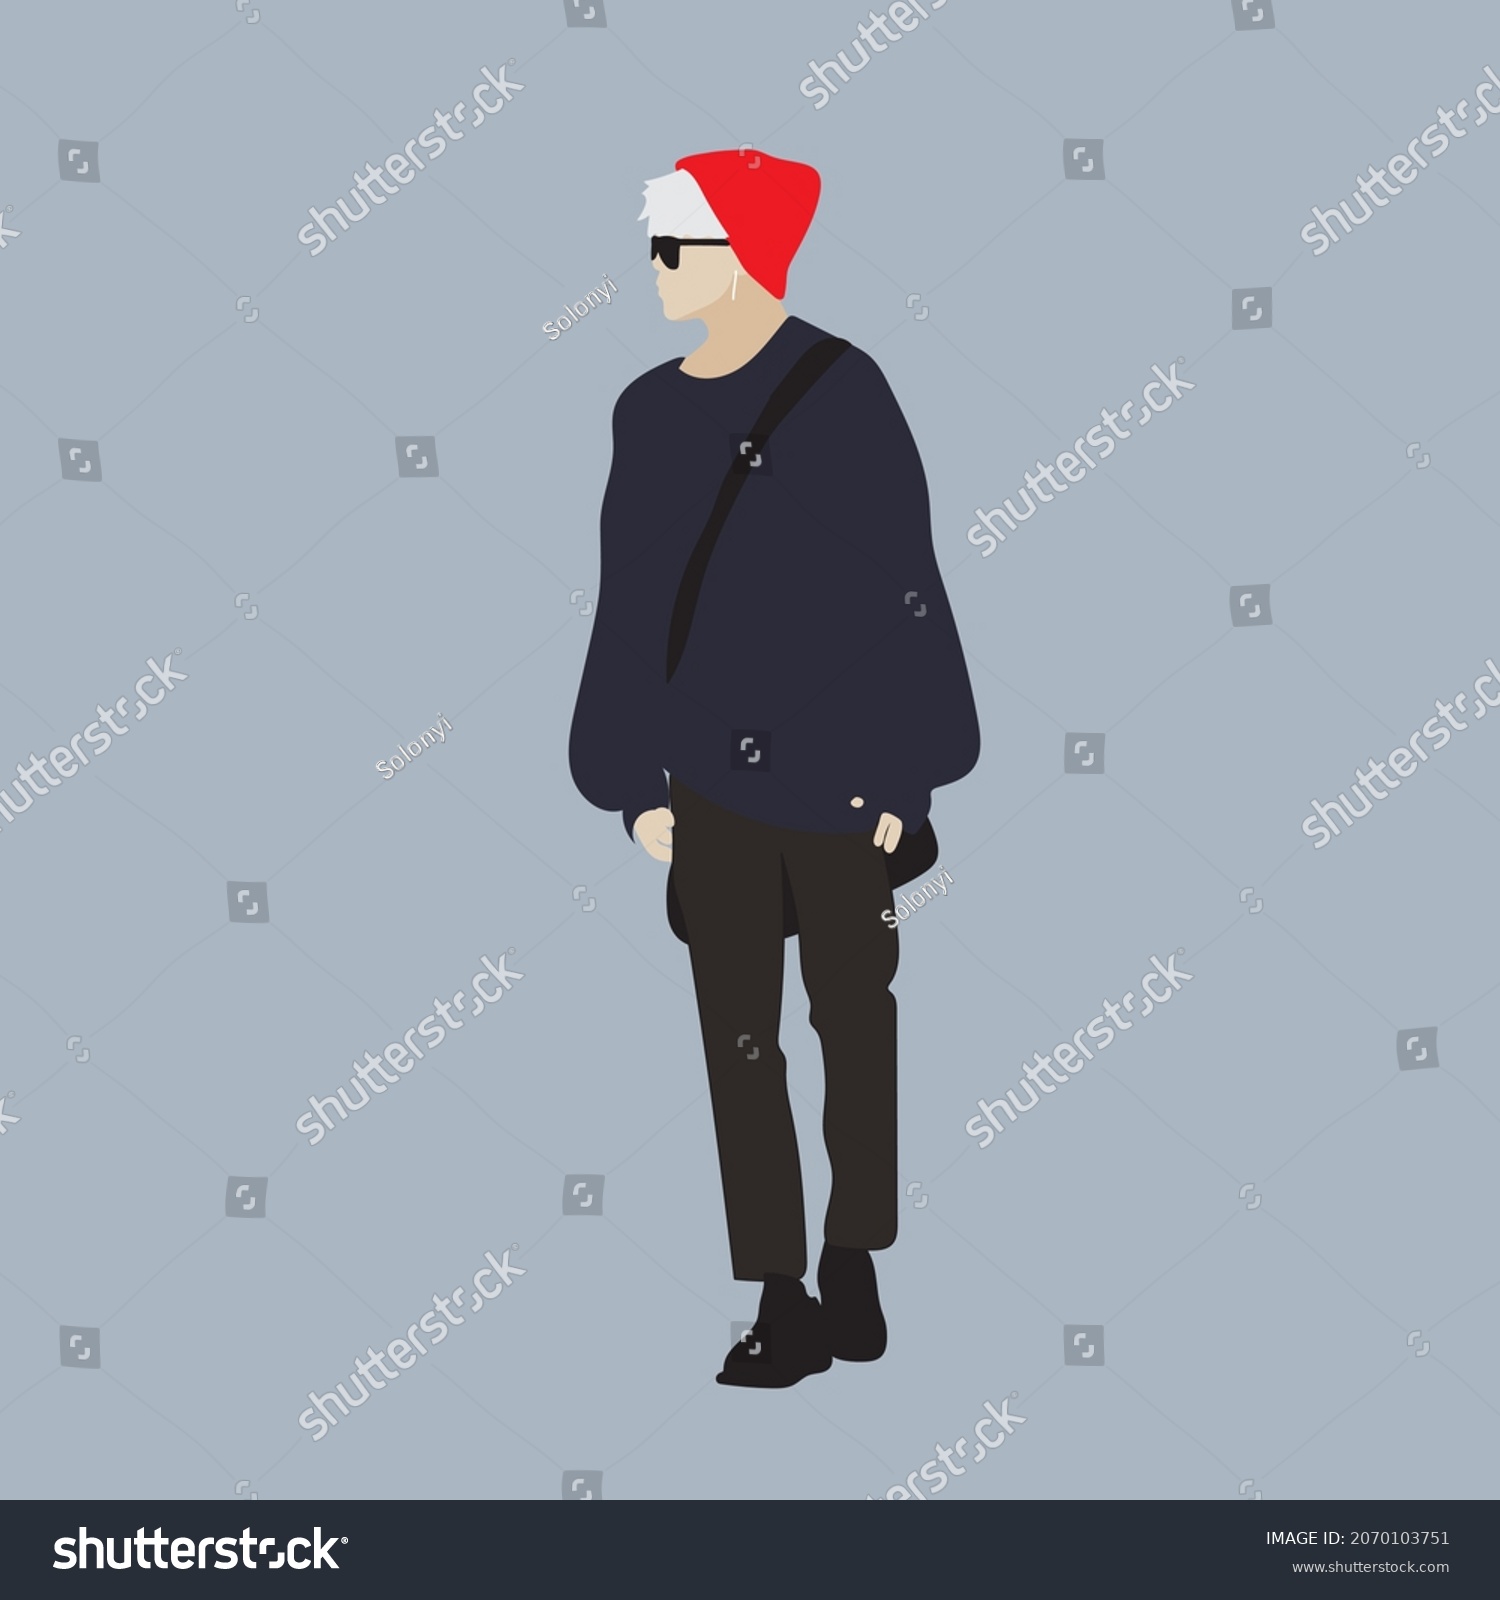 SVG of Vector illustration of Kpop street fashion. Street idols of Koreans. Men's fashion idols Kpop. A guy in black trousers and a red hat. svg